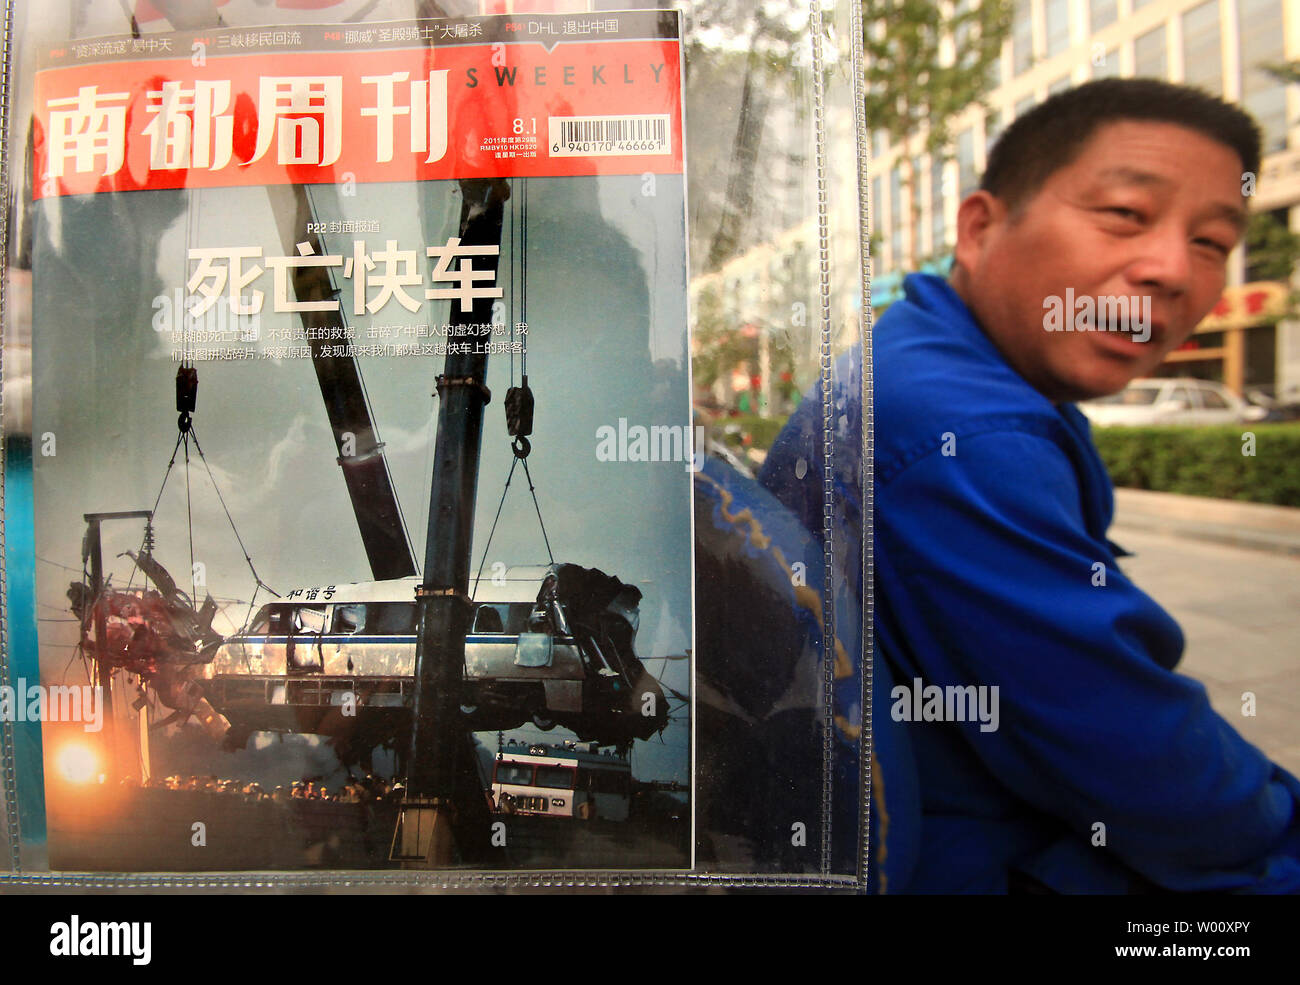 A magazine featuring a story about last week's deadly high-speed train crash is displayed on a news stand in downtown Beijing on August 2, 2011.  The Chinese government is wrestling with a serious backlash over its handling of a deadly high-speed train crash, with critics saying the government is more concerned with preserving its own image than with public safety.  China implemented a blackout on news coverage of the disaster that resulted in some critical newspaper articles.    UPI/Stephen Shaver Stock Photo